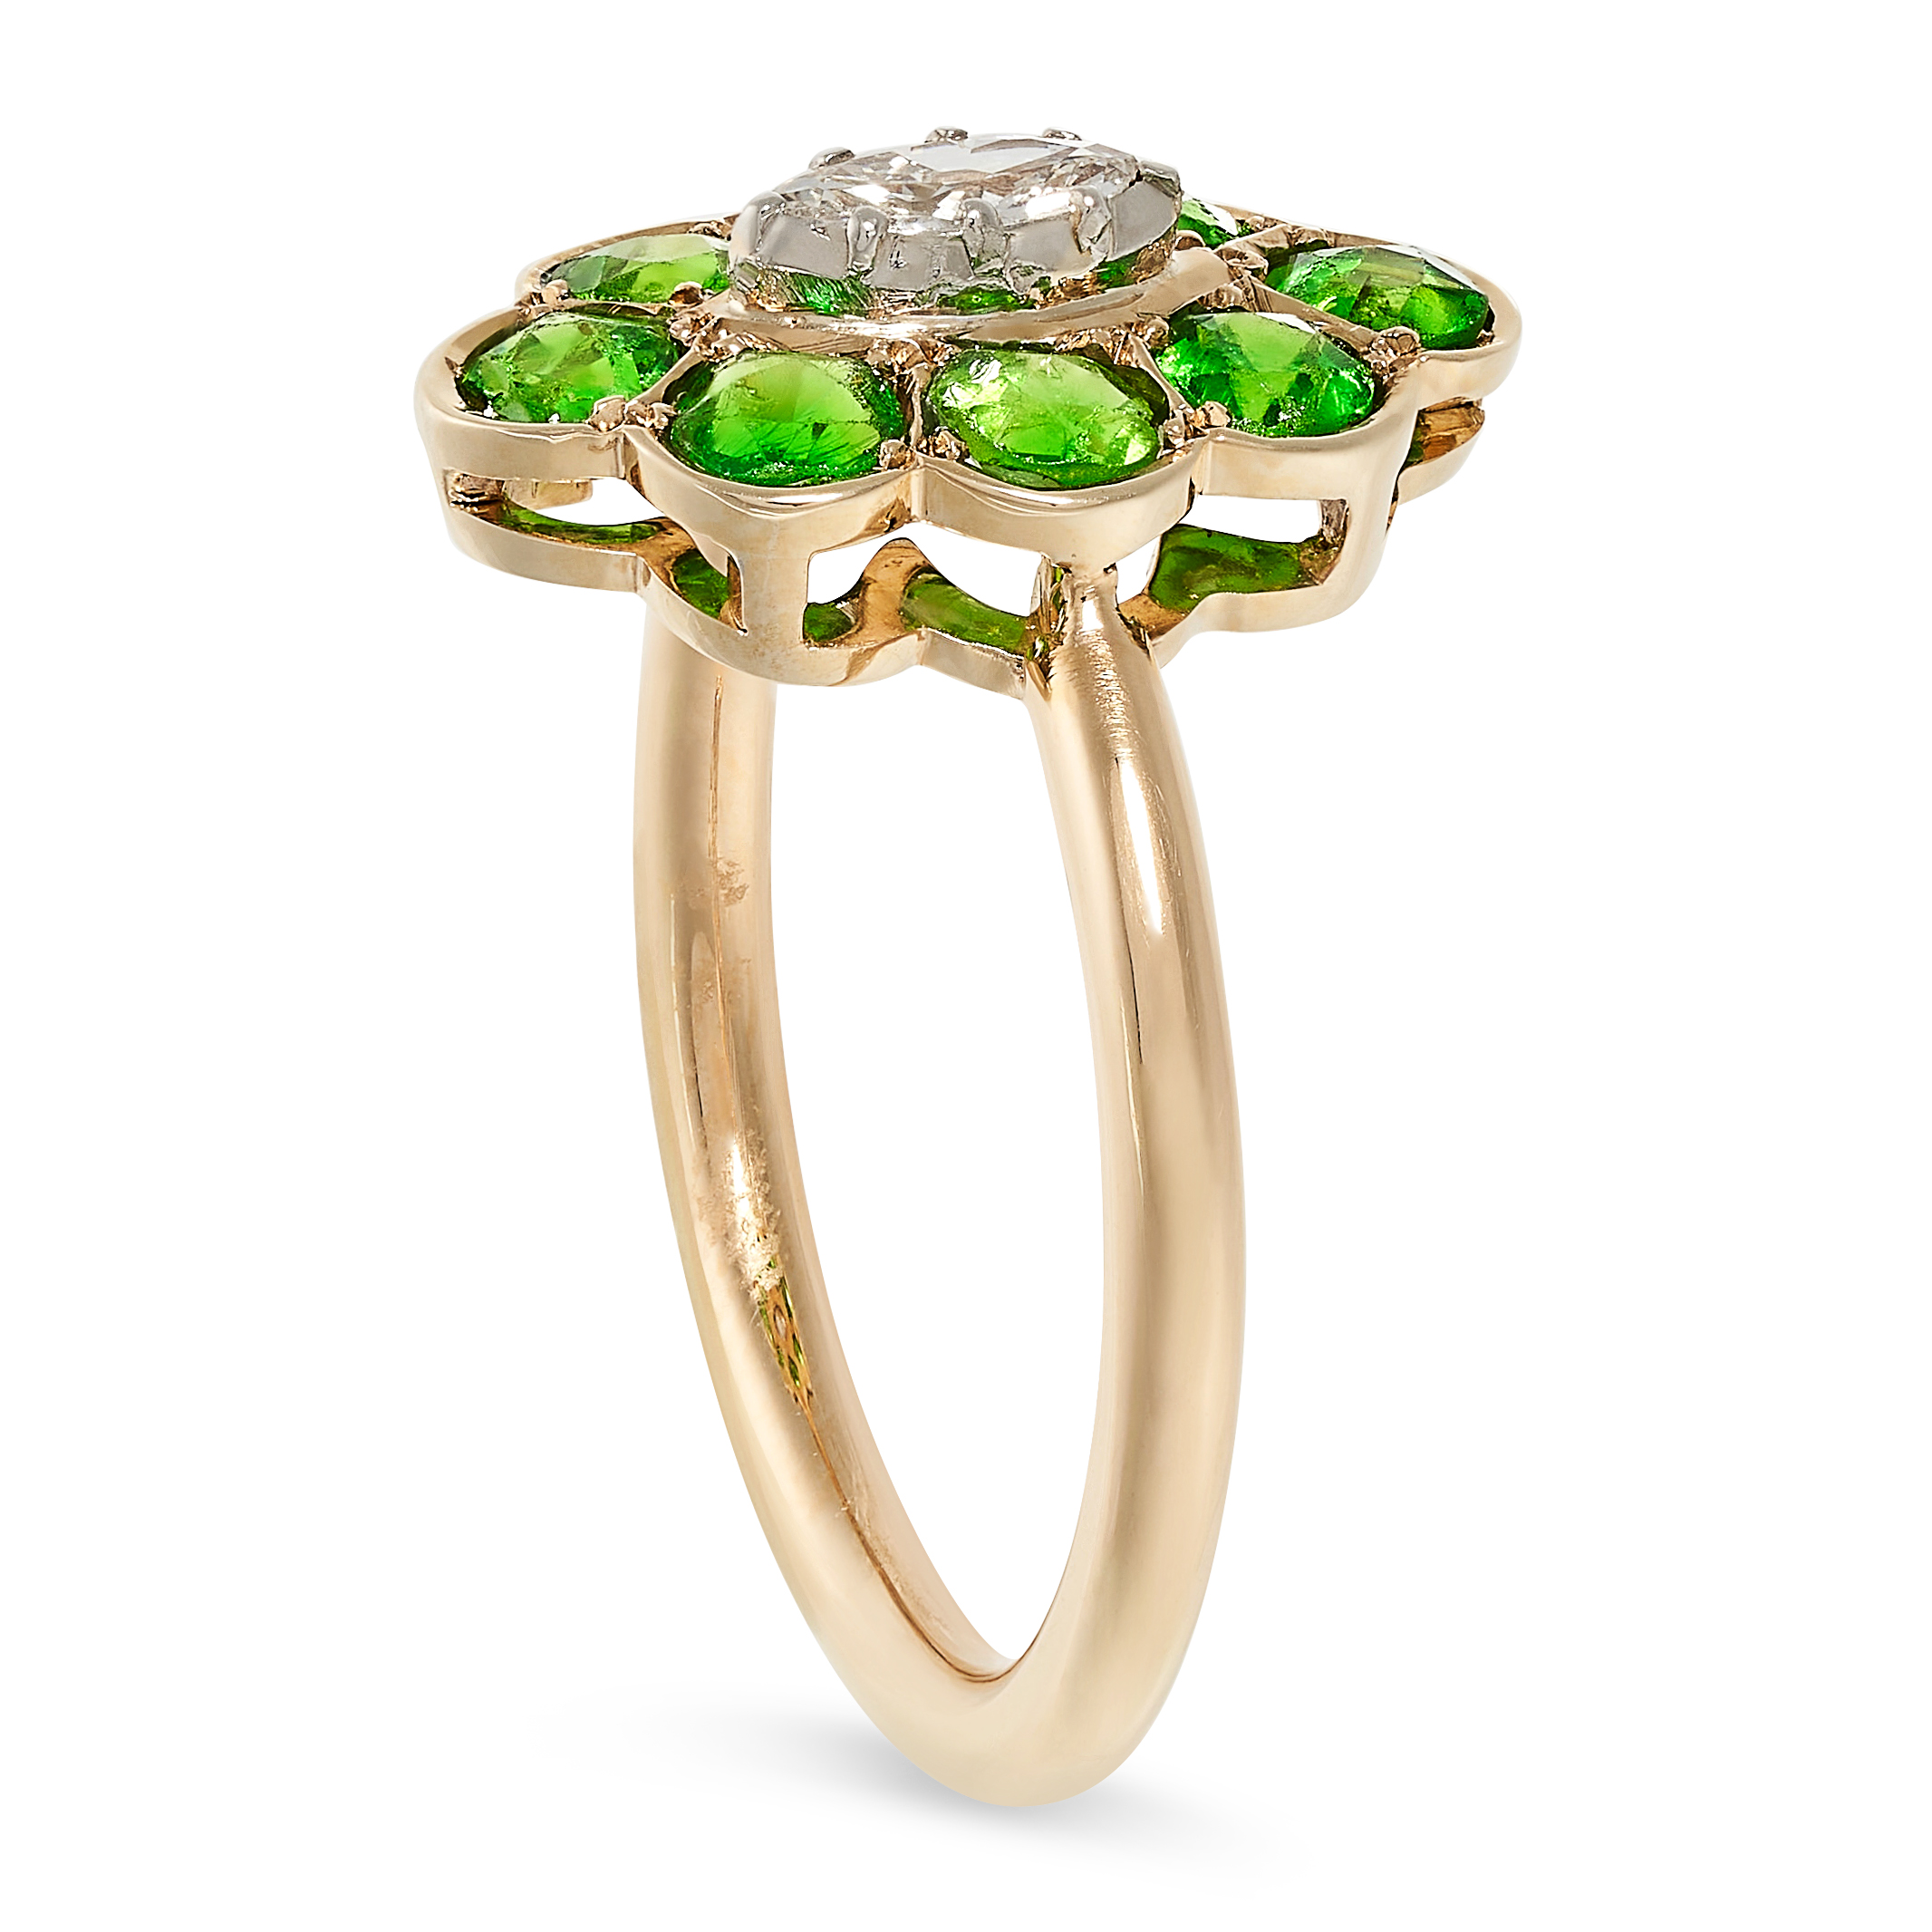 A DEMANTOID GARNET AND DIAMOND RING the navette face set with a central a marquise cut diamond of - Image 2 of 2